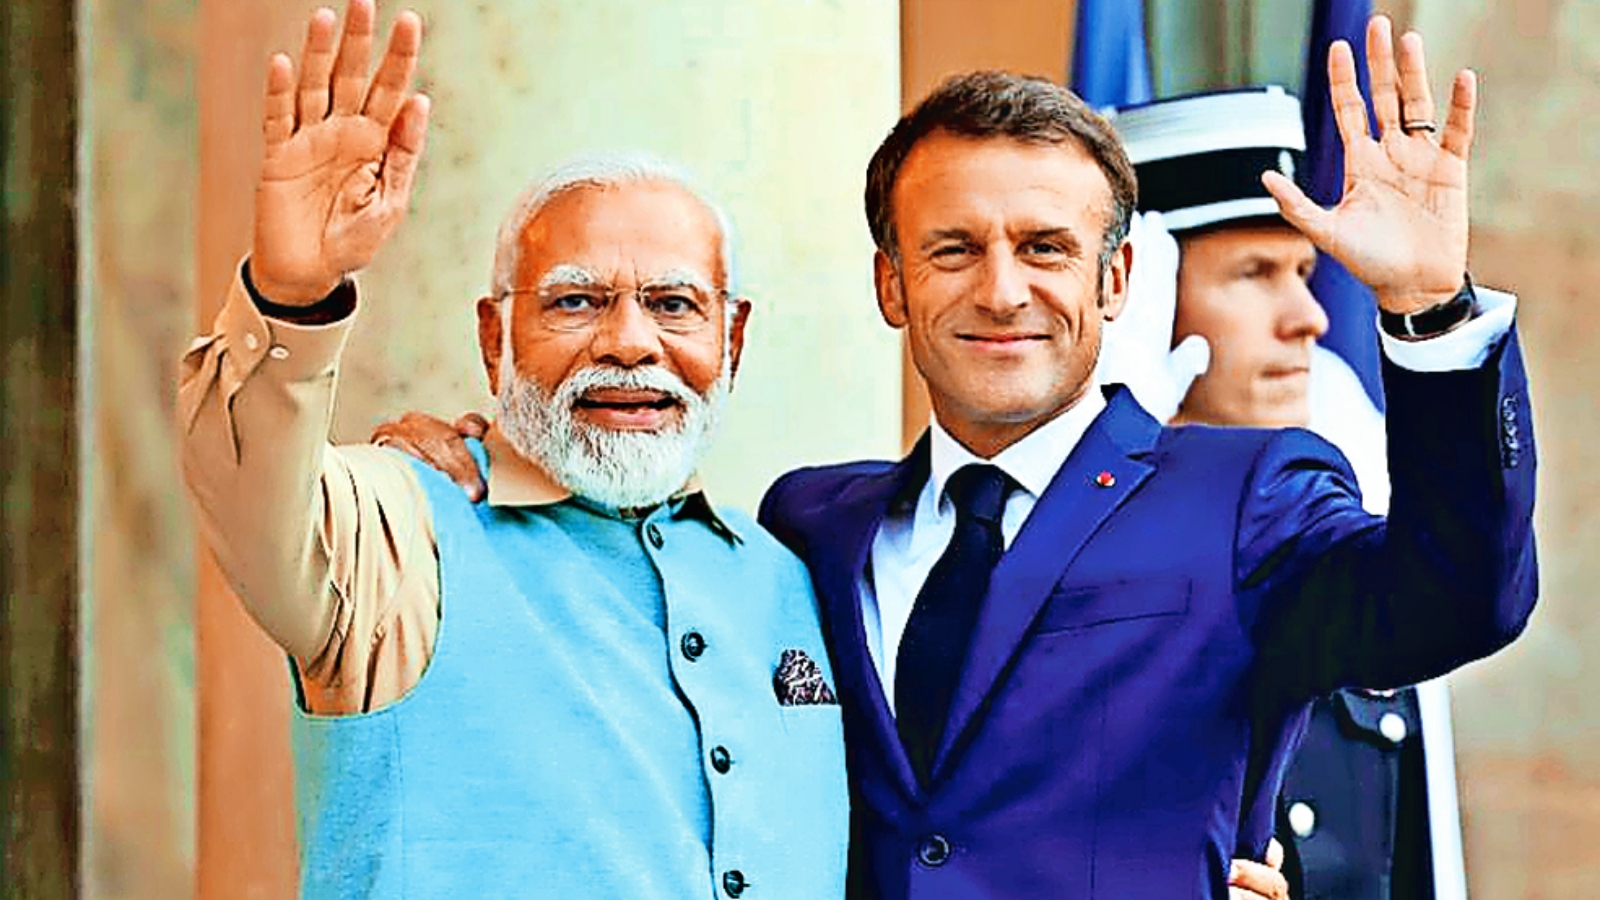 android, before r-day, modi-macron roadshow likely in jaipur